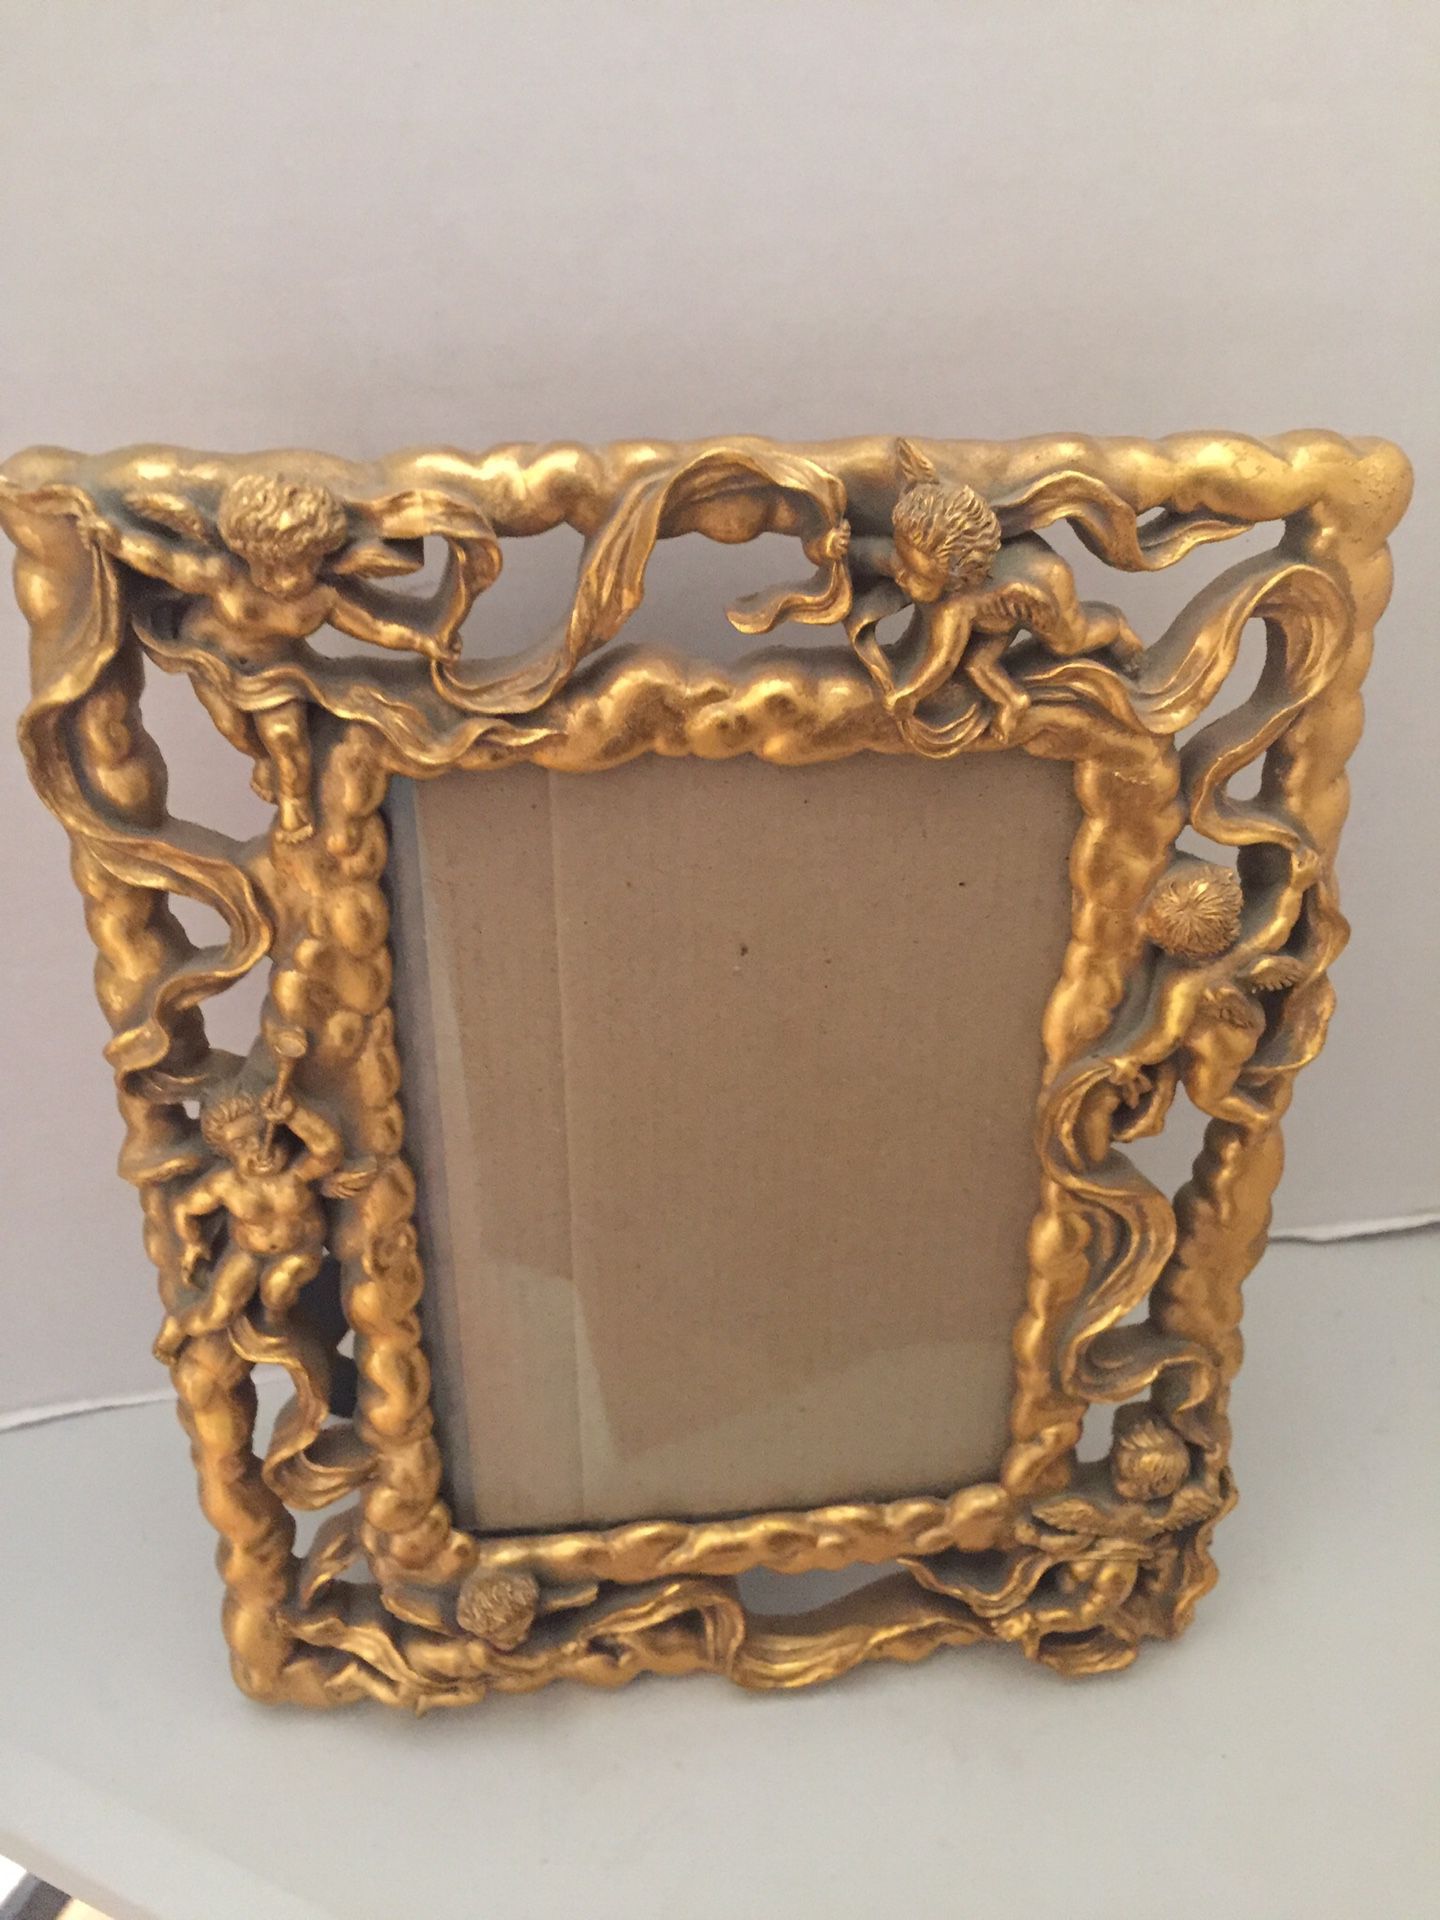 Angel Picture Frame